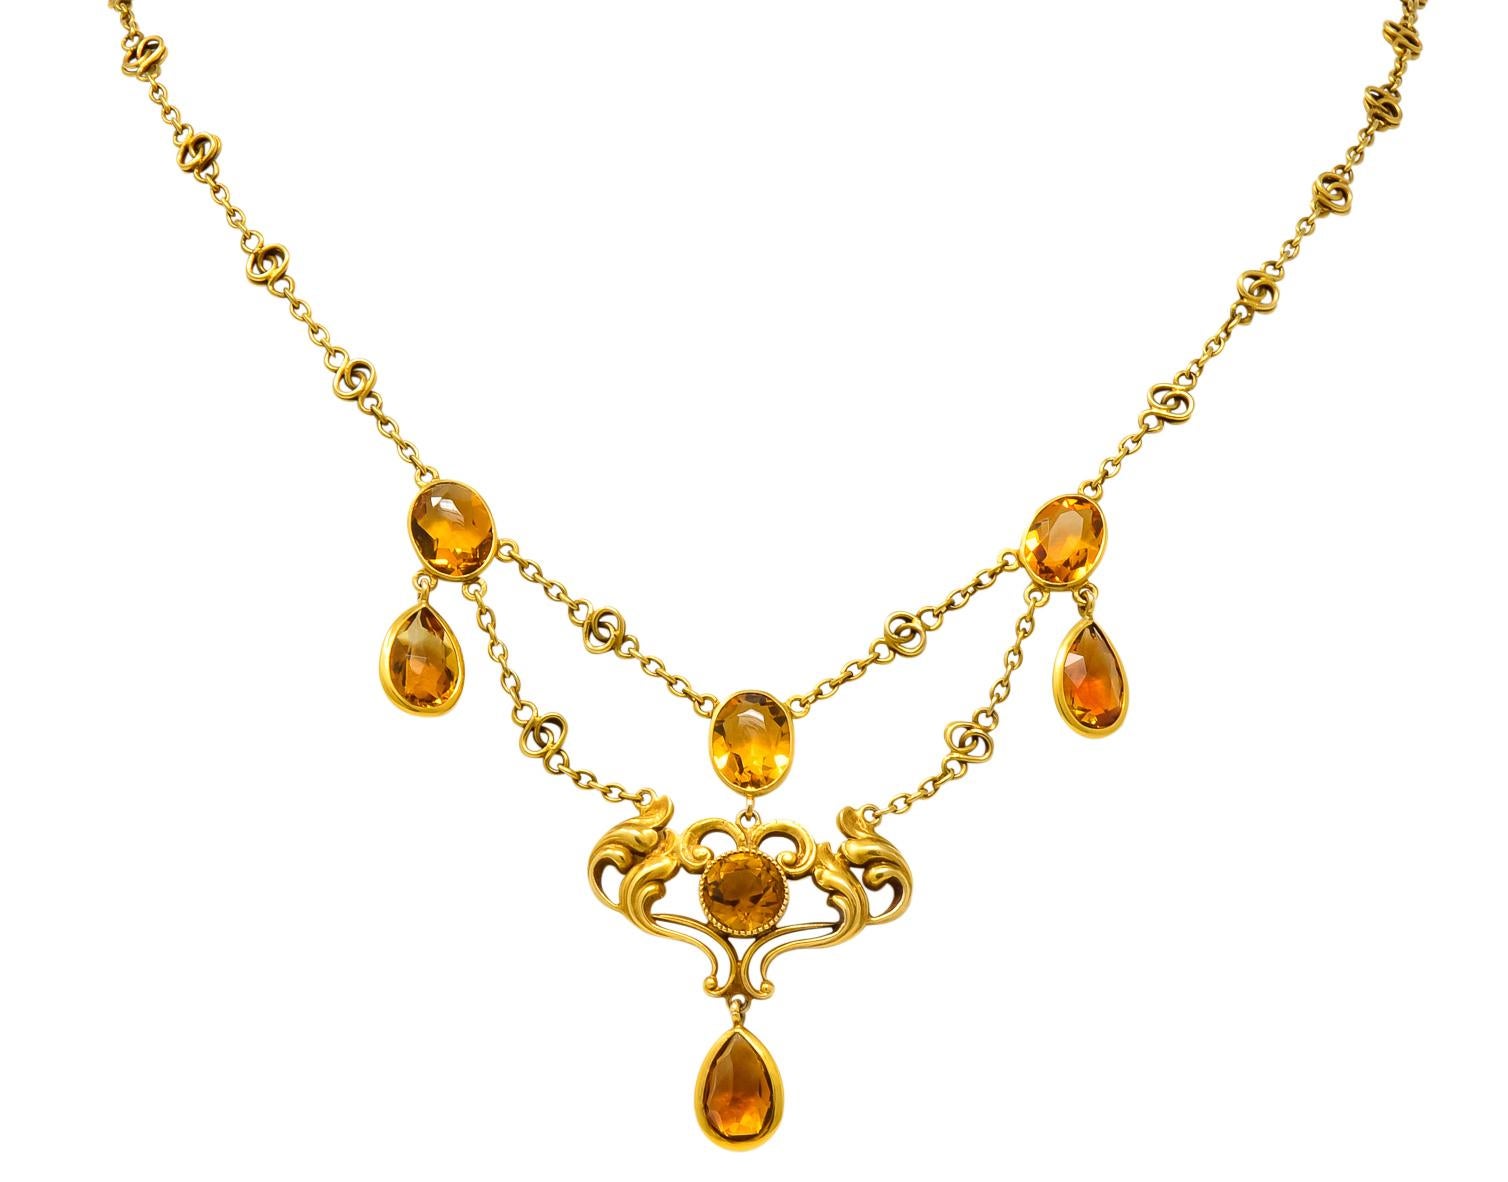 Swag style with bezel set round, pear, and oval shaped citrines

Total citrine weight approximately 11.50 carats, deep rich orange and very well matched

With satin gold whiplash detail

On a decorative chain completed by spring ring clasp

Stamped